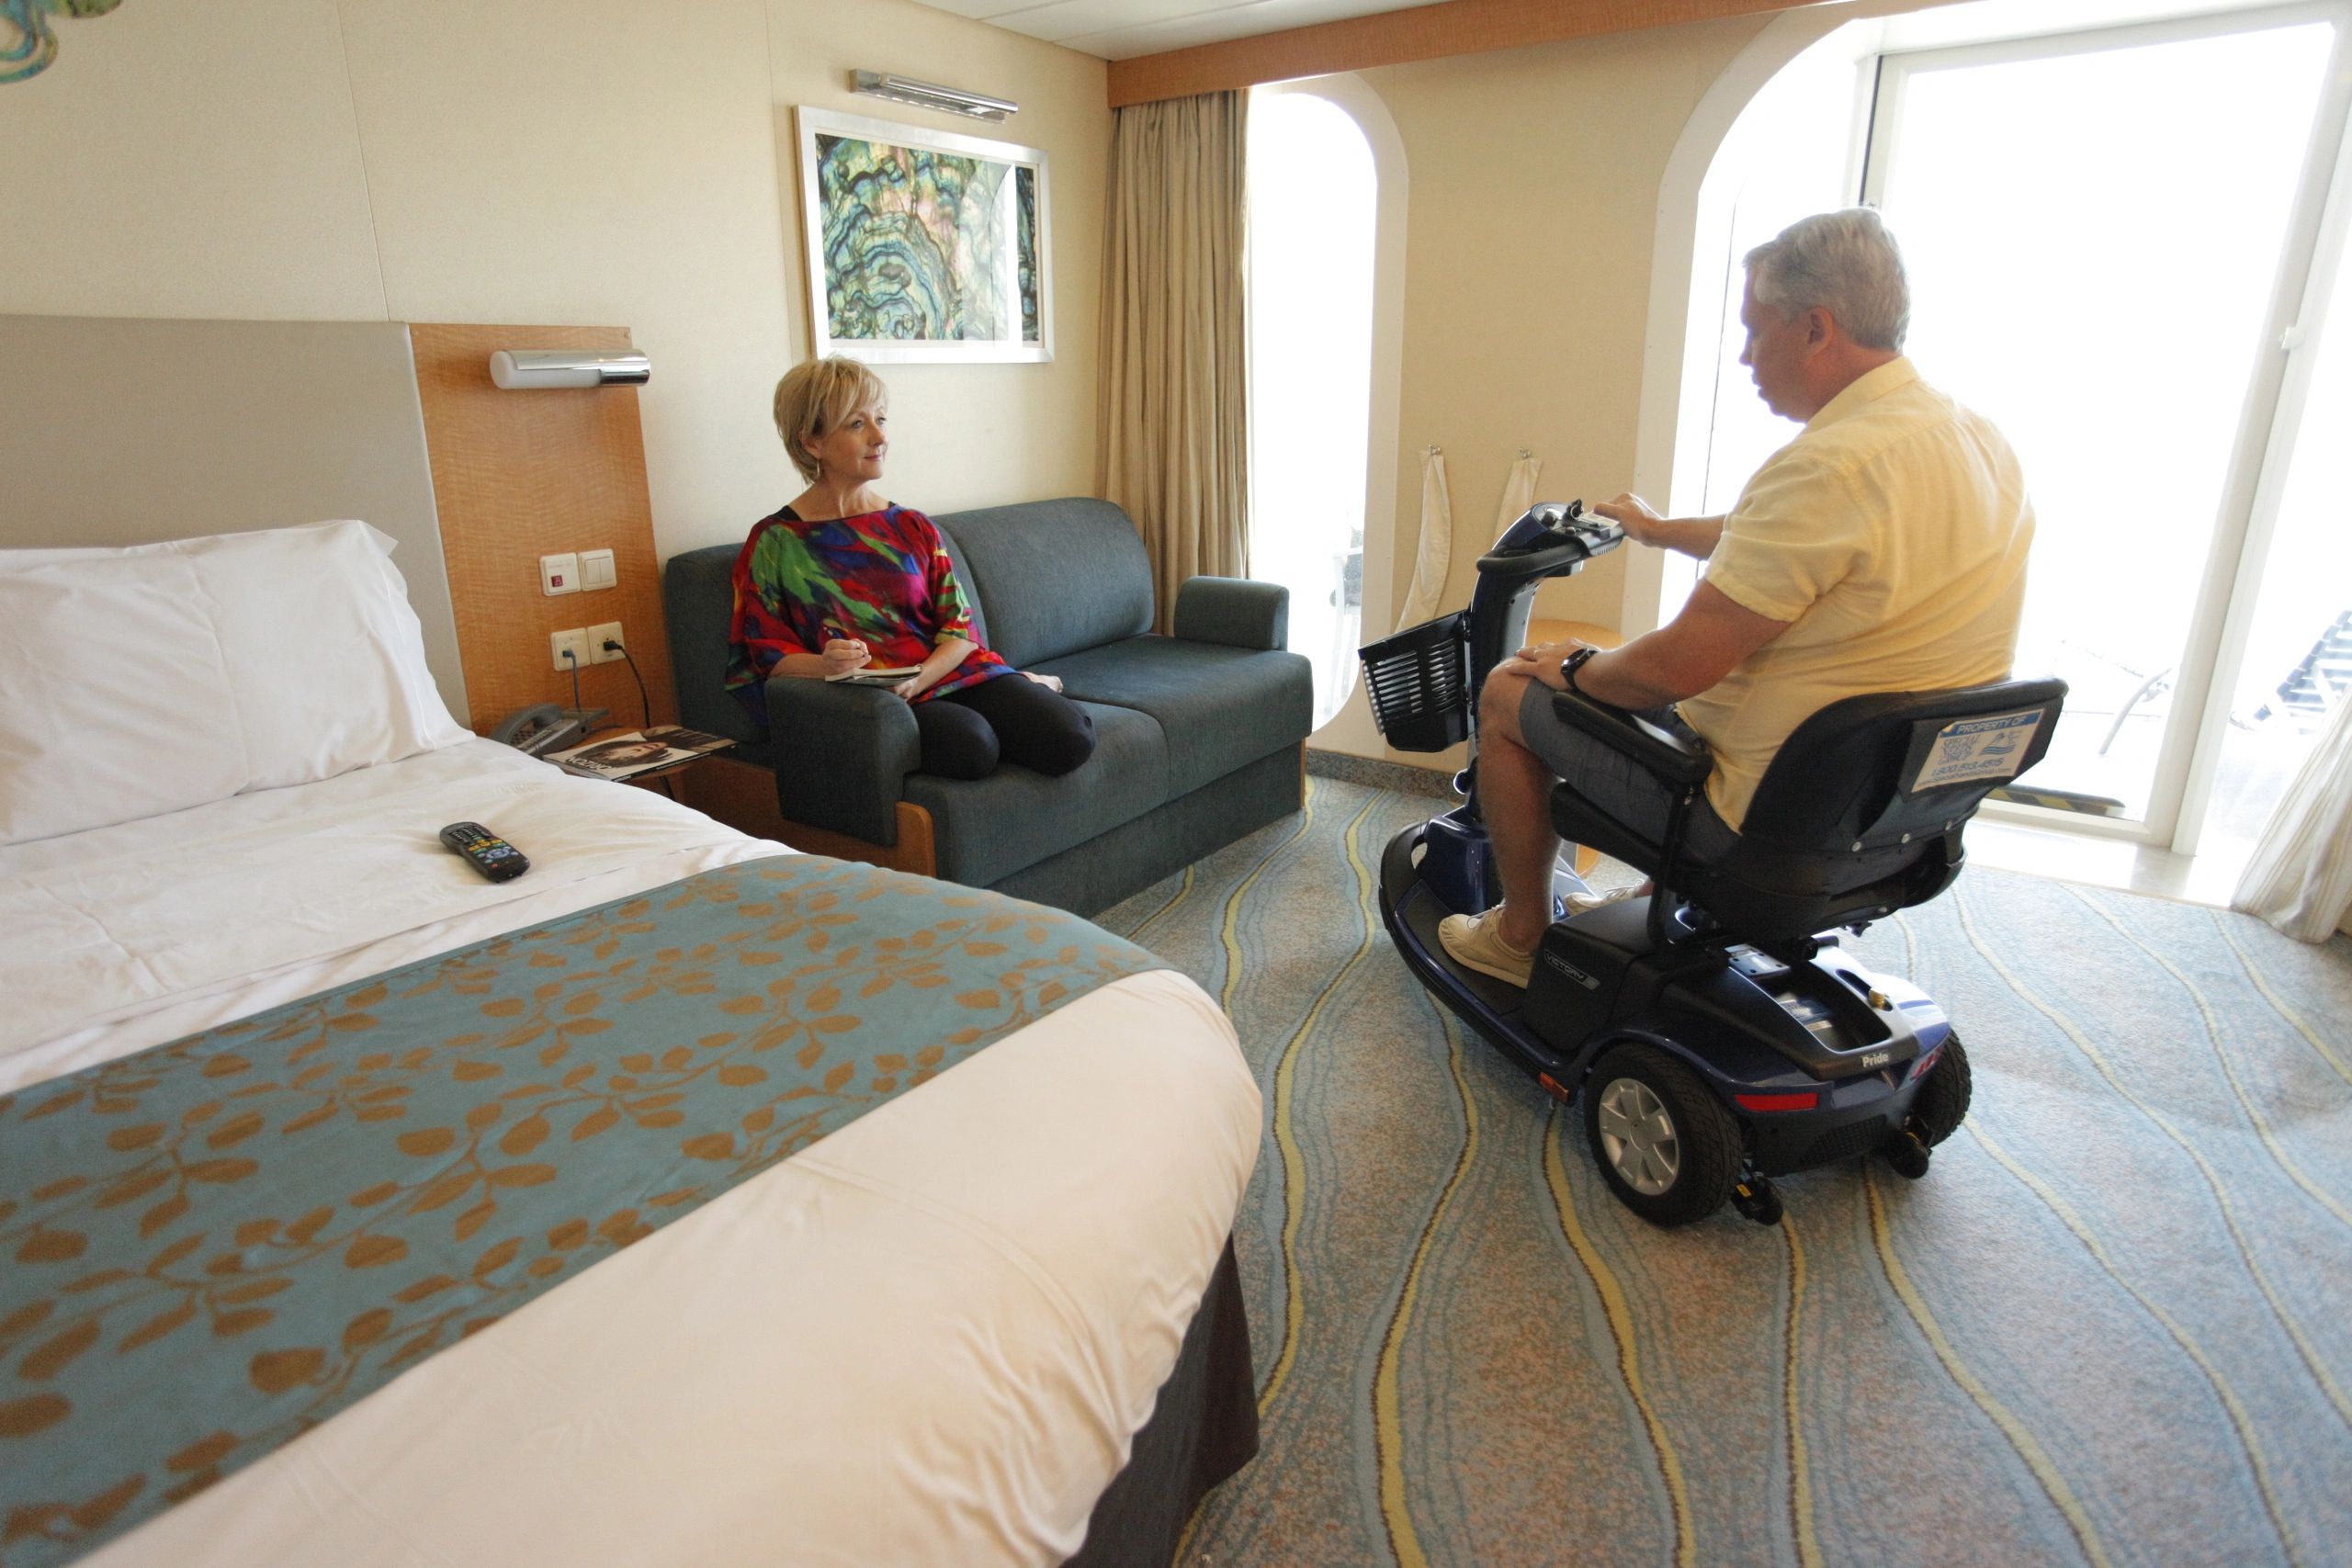 Motorized mobility chair in a cruise cabin